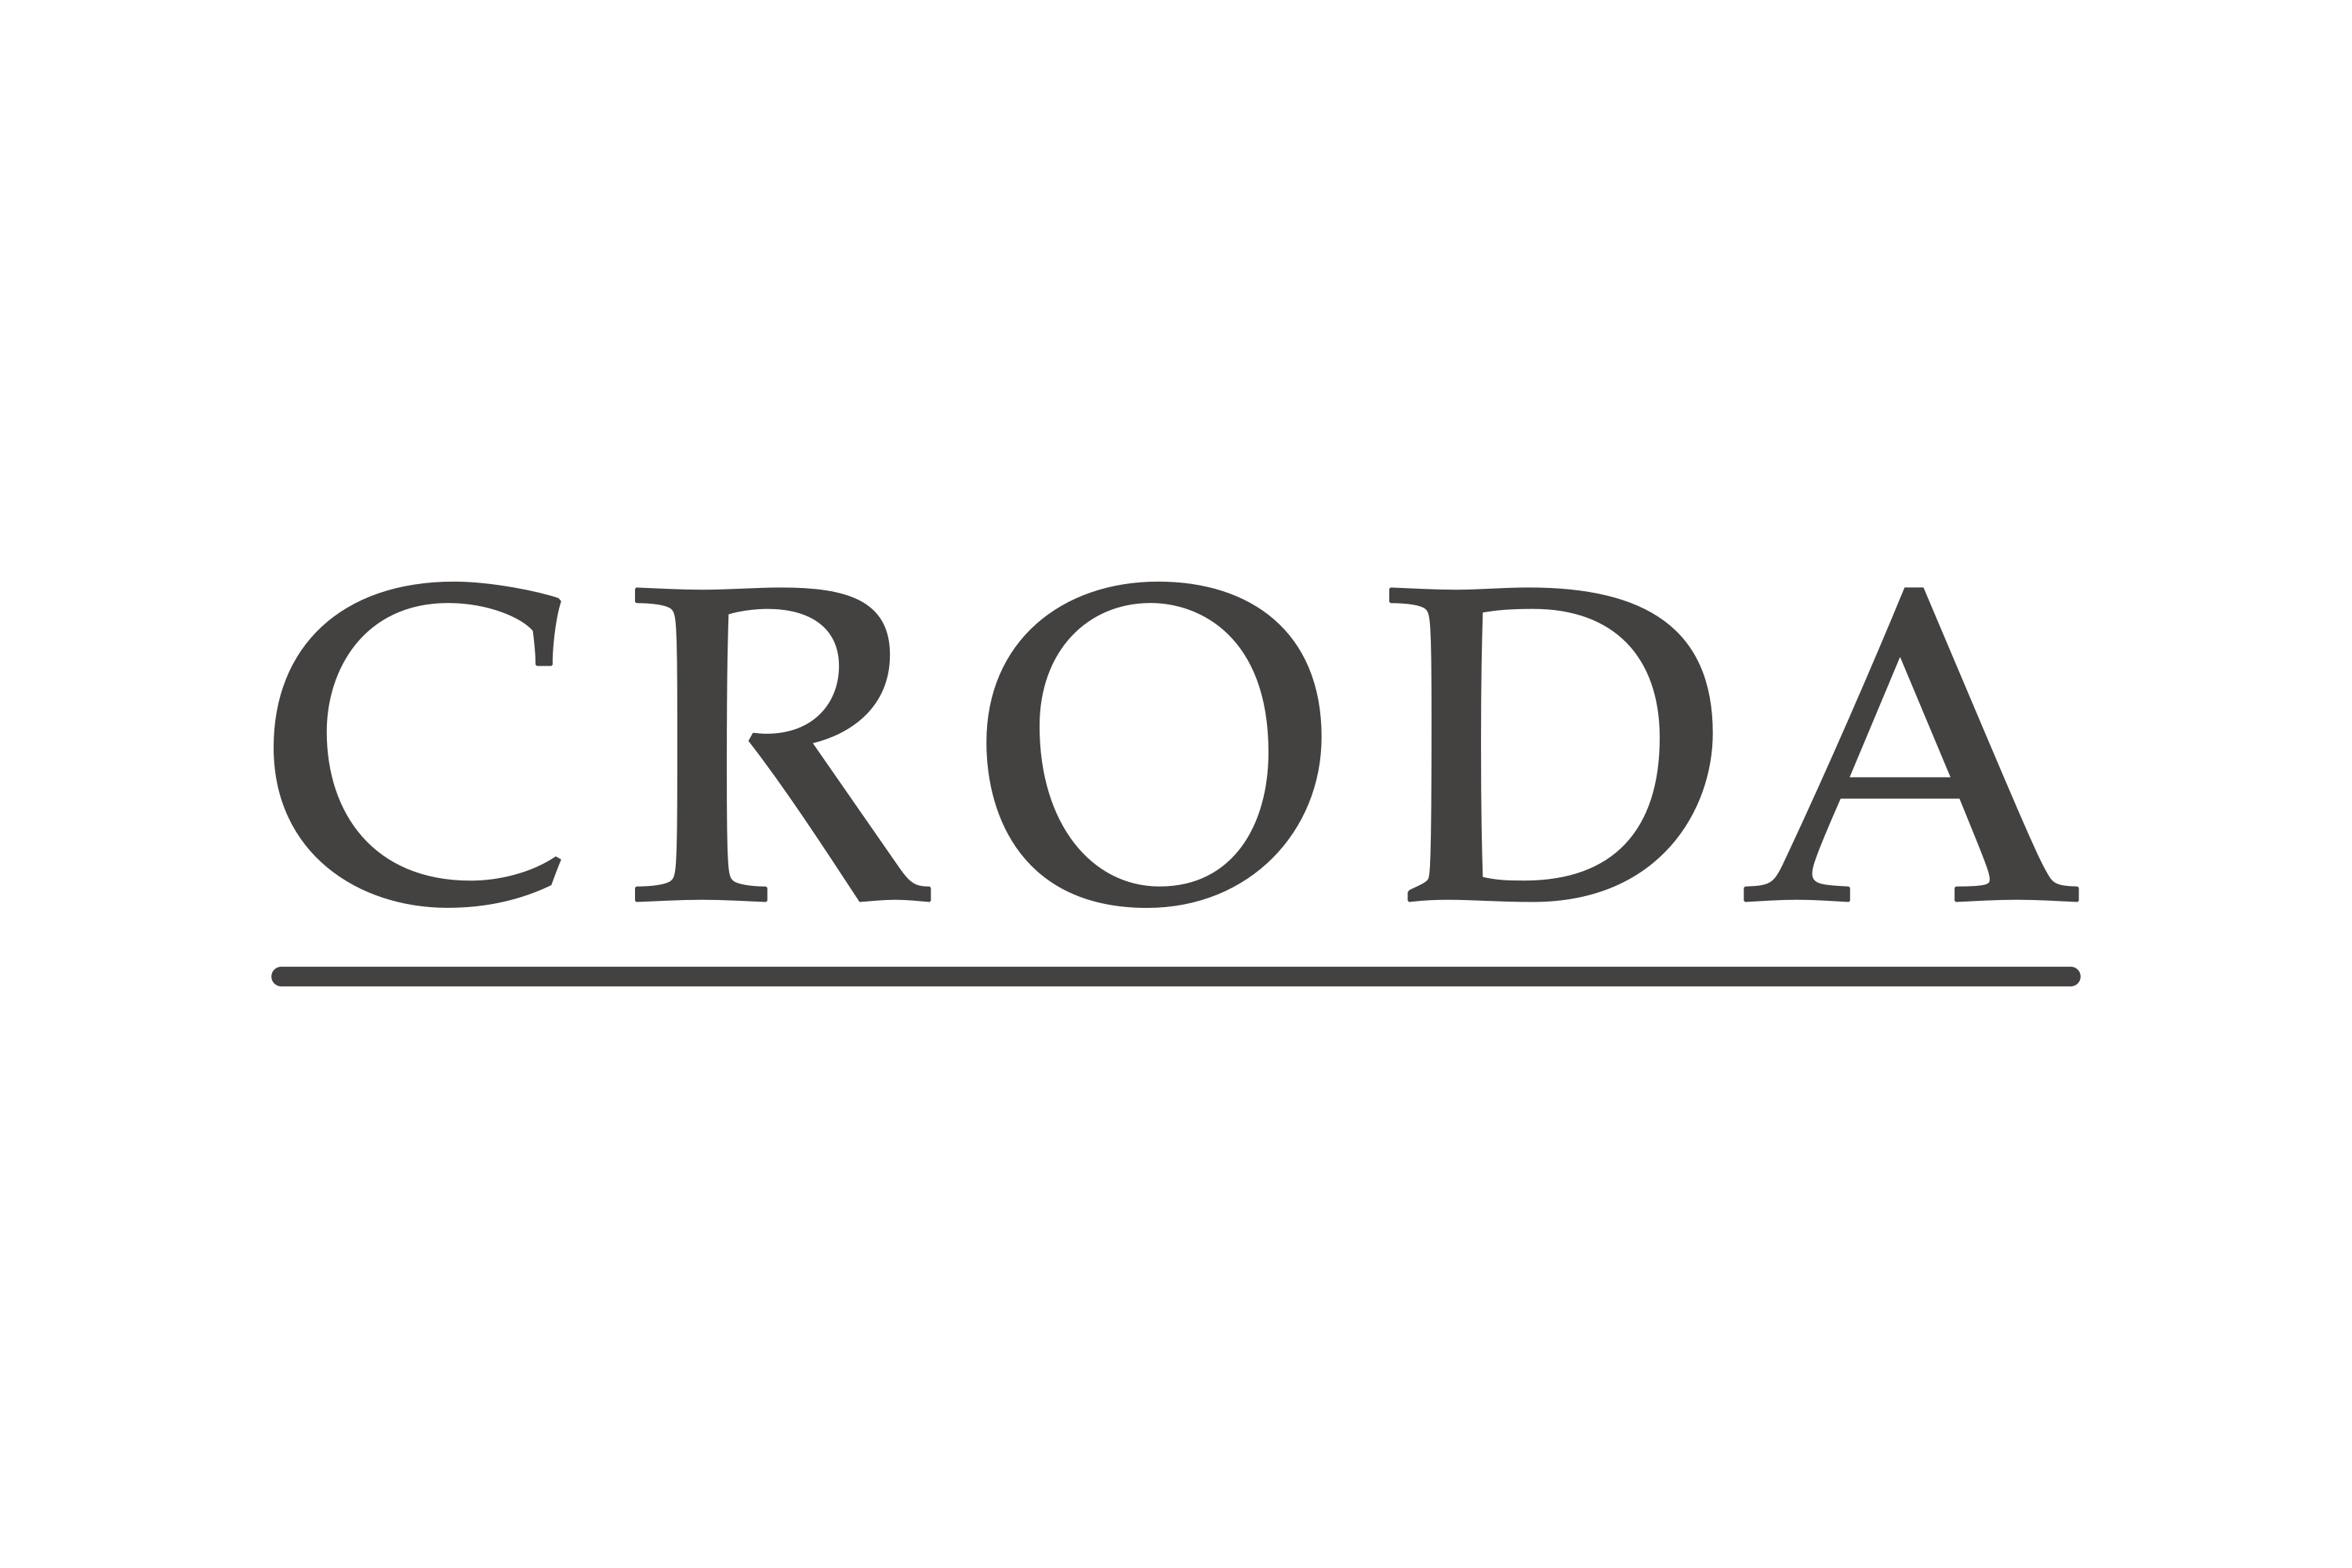 Croda (performance Technologies & Industrial Chemicals Business)